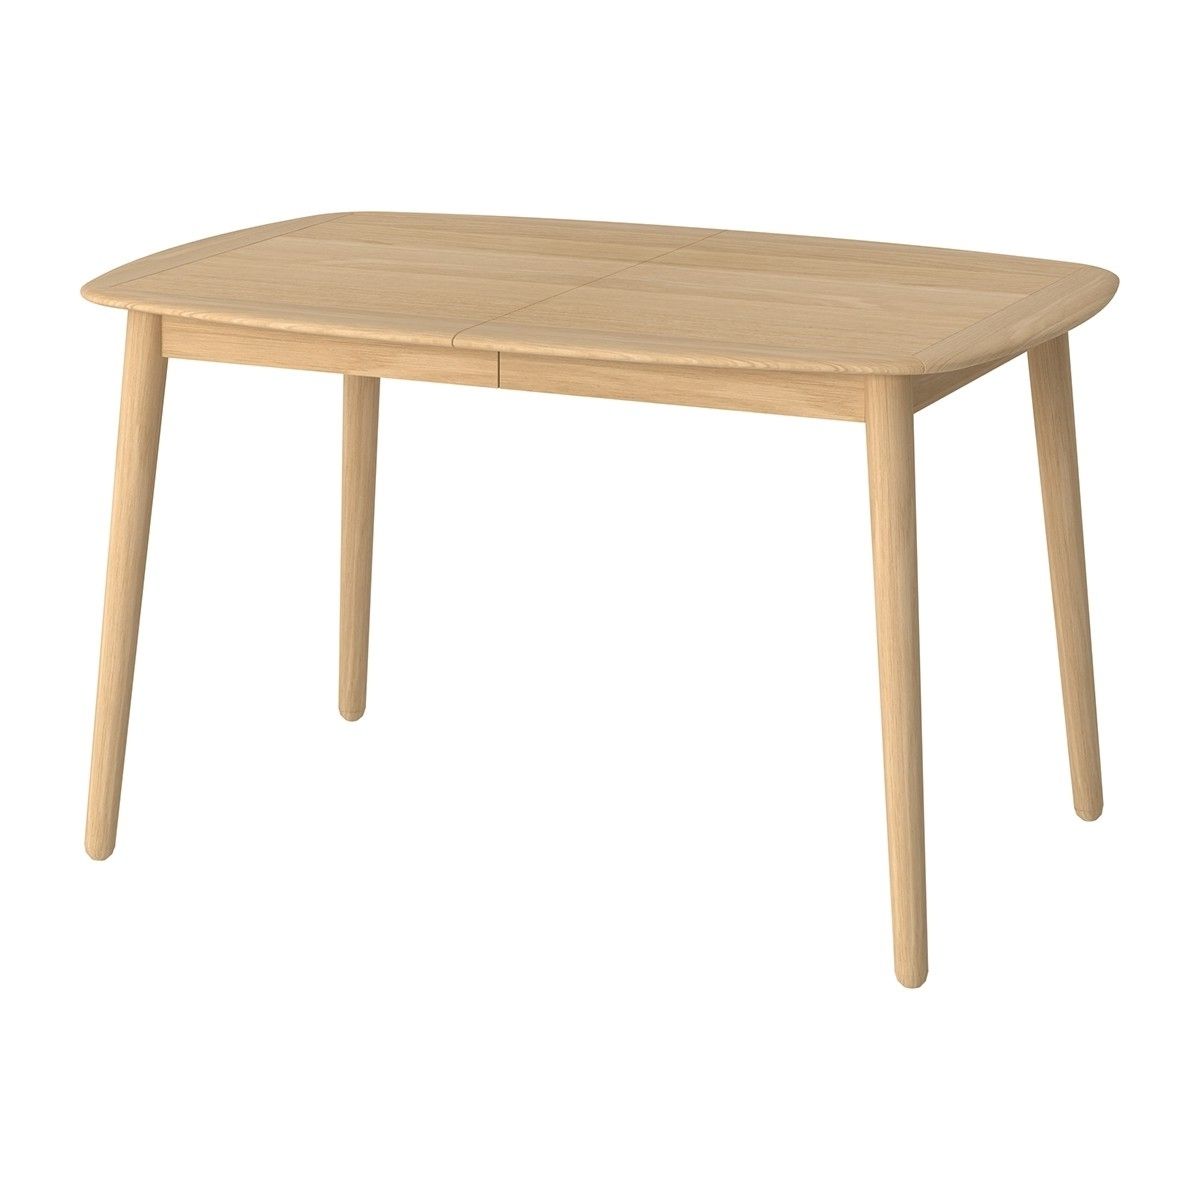 Small Oak Dining Tables Pertaining To Fashionable Life Interiors – Koto Extension Dining Table (oak, Small) – Modern (View 11 of 25)